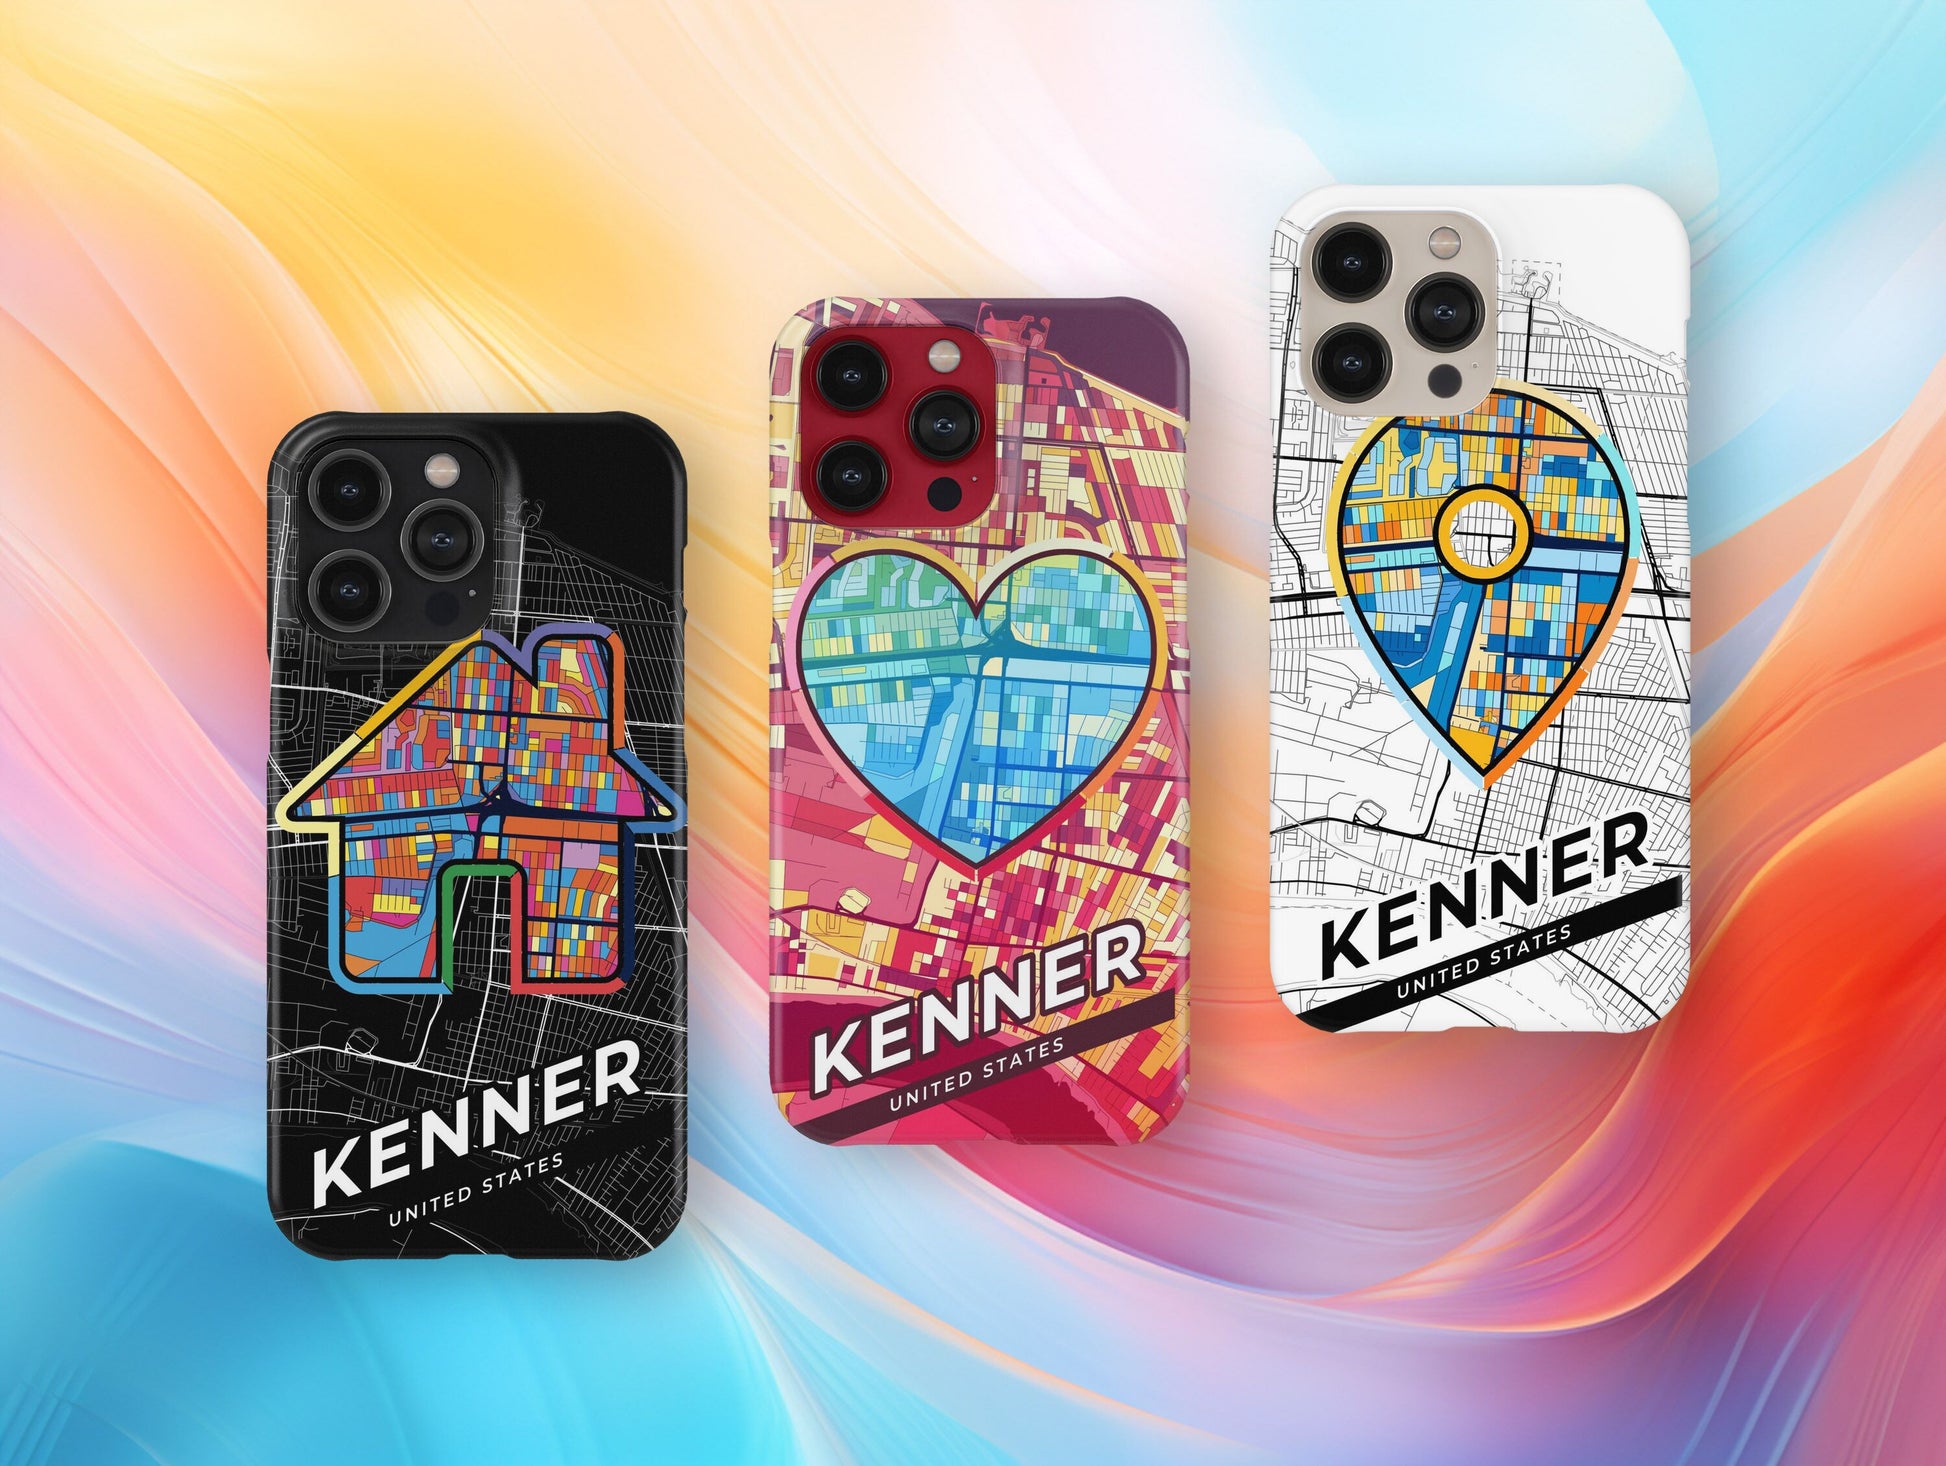 Kenner Louisiana slim phone case with colorful icon. Birthday, wedding or housewarming gift. Couple match cases.